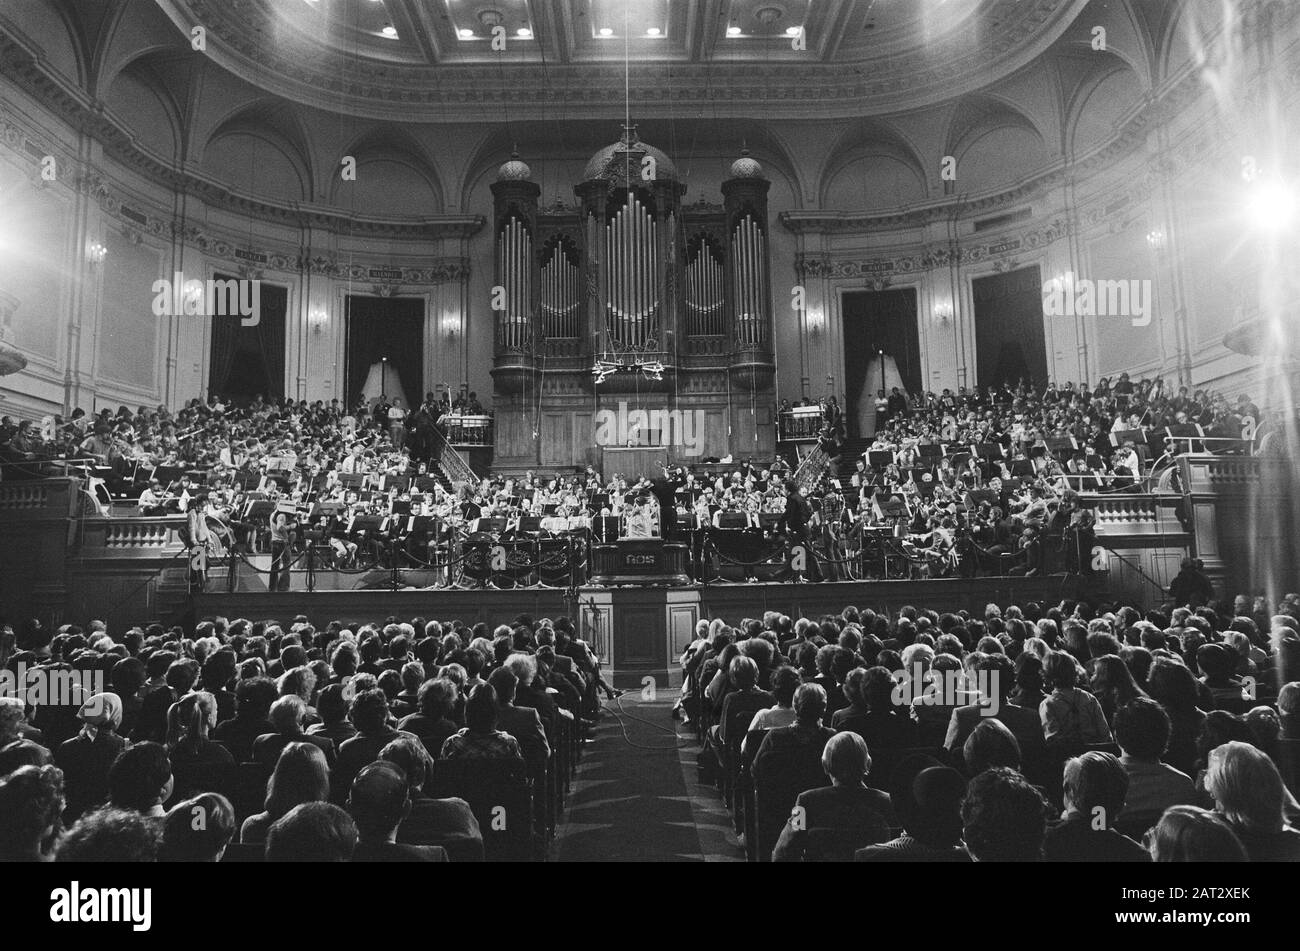 Biggest symphony orchestra (415 men) in connection with 100th Fur Elise broadcast in Concertgebouw; largest symphony orchestra of all time Date: December 10, 1978 Keywords: orchestras, broadcasts Institution name: Concertgebouw Stock Photo